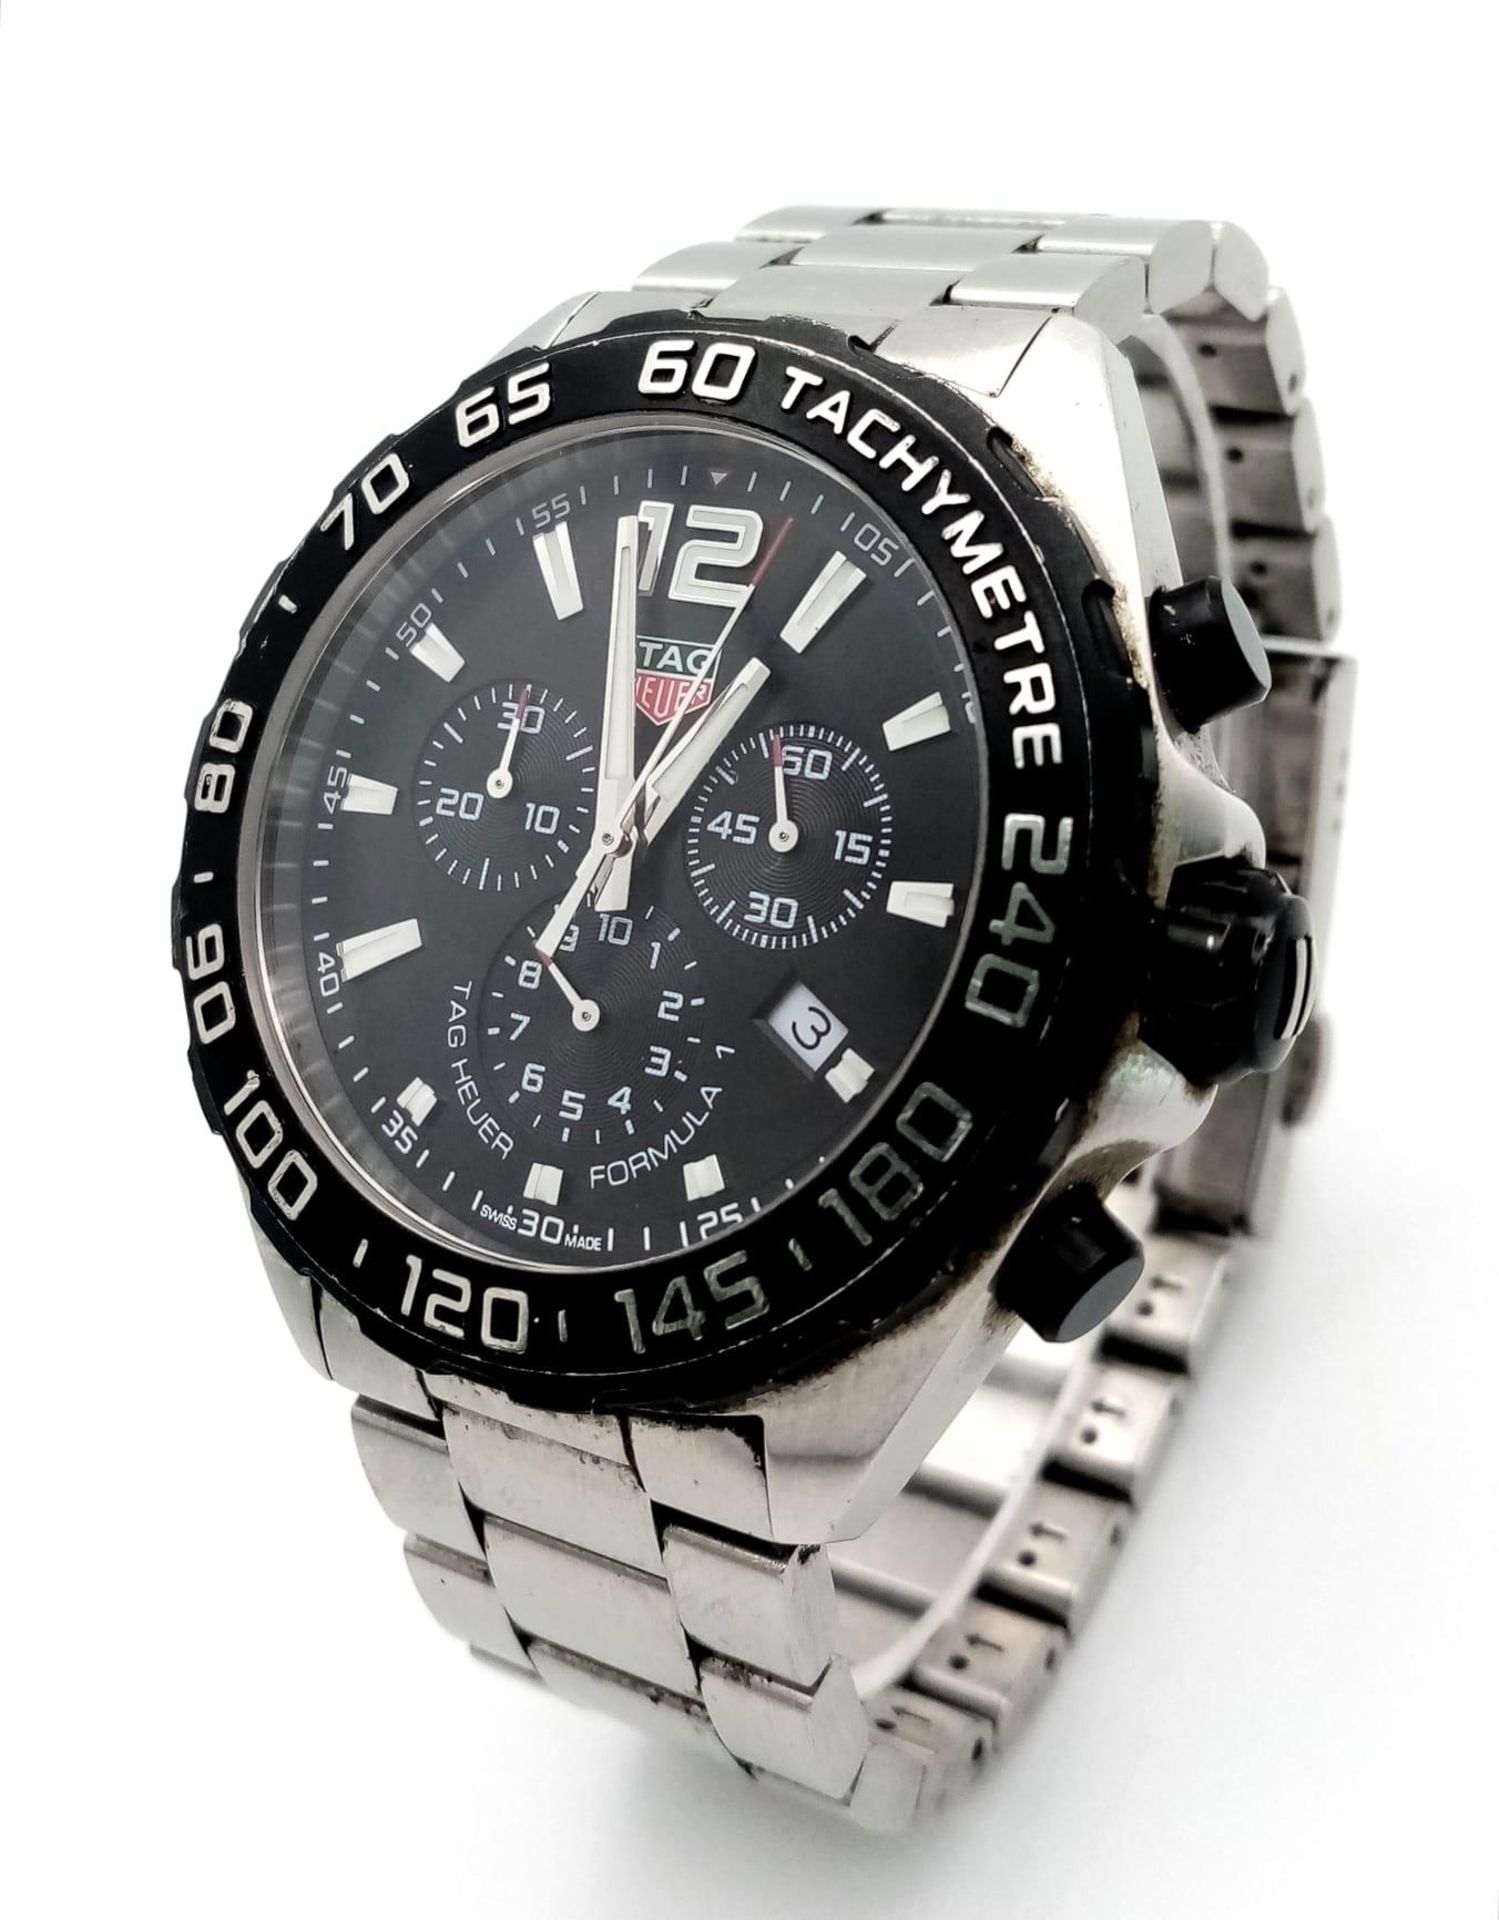 A Tag Heuer Formula Chronograph Gents Watch. Stainless steel bracelet and case - 43mm. Black dial